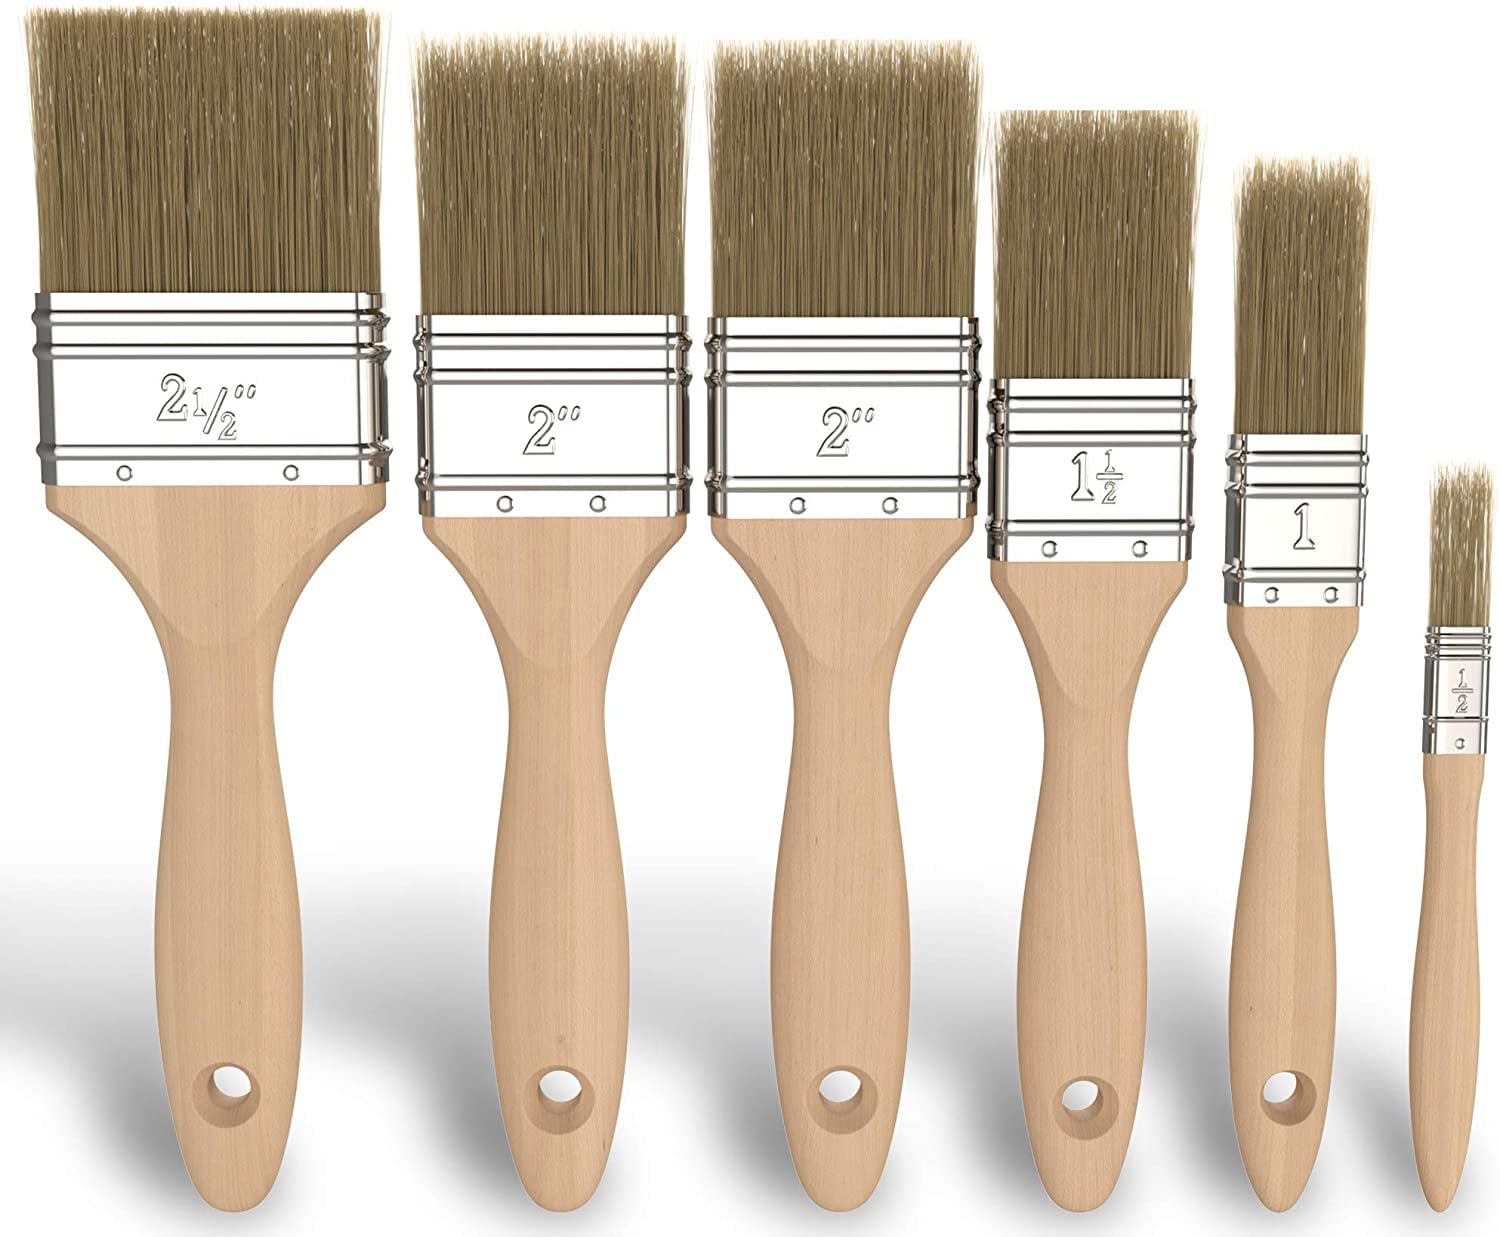 4. The Best Nail Art Brushes for Every Type of Design - wide 8